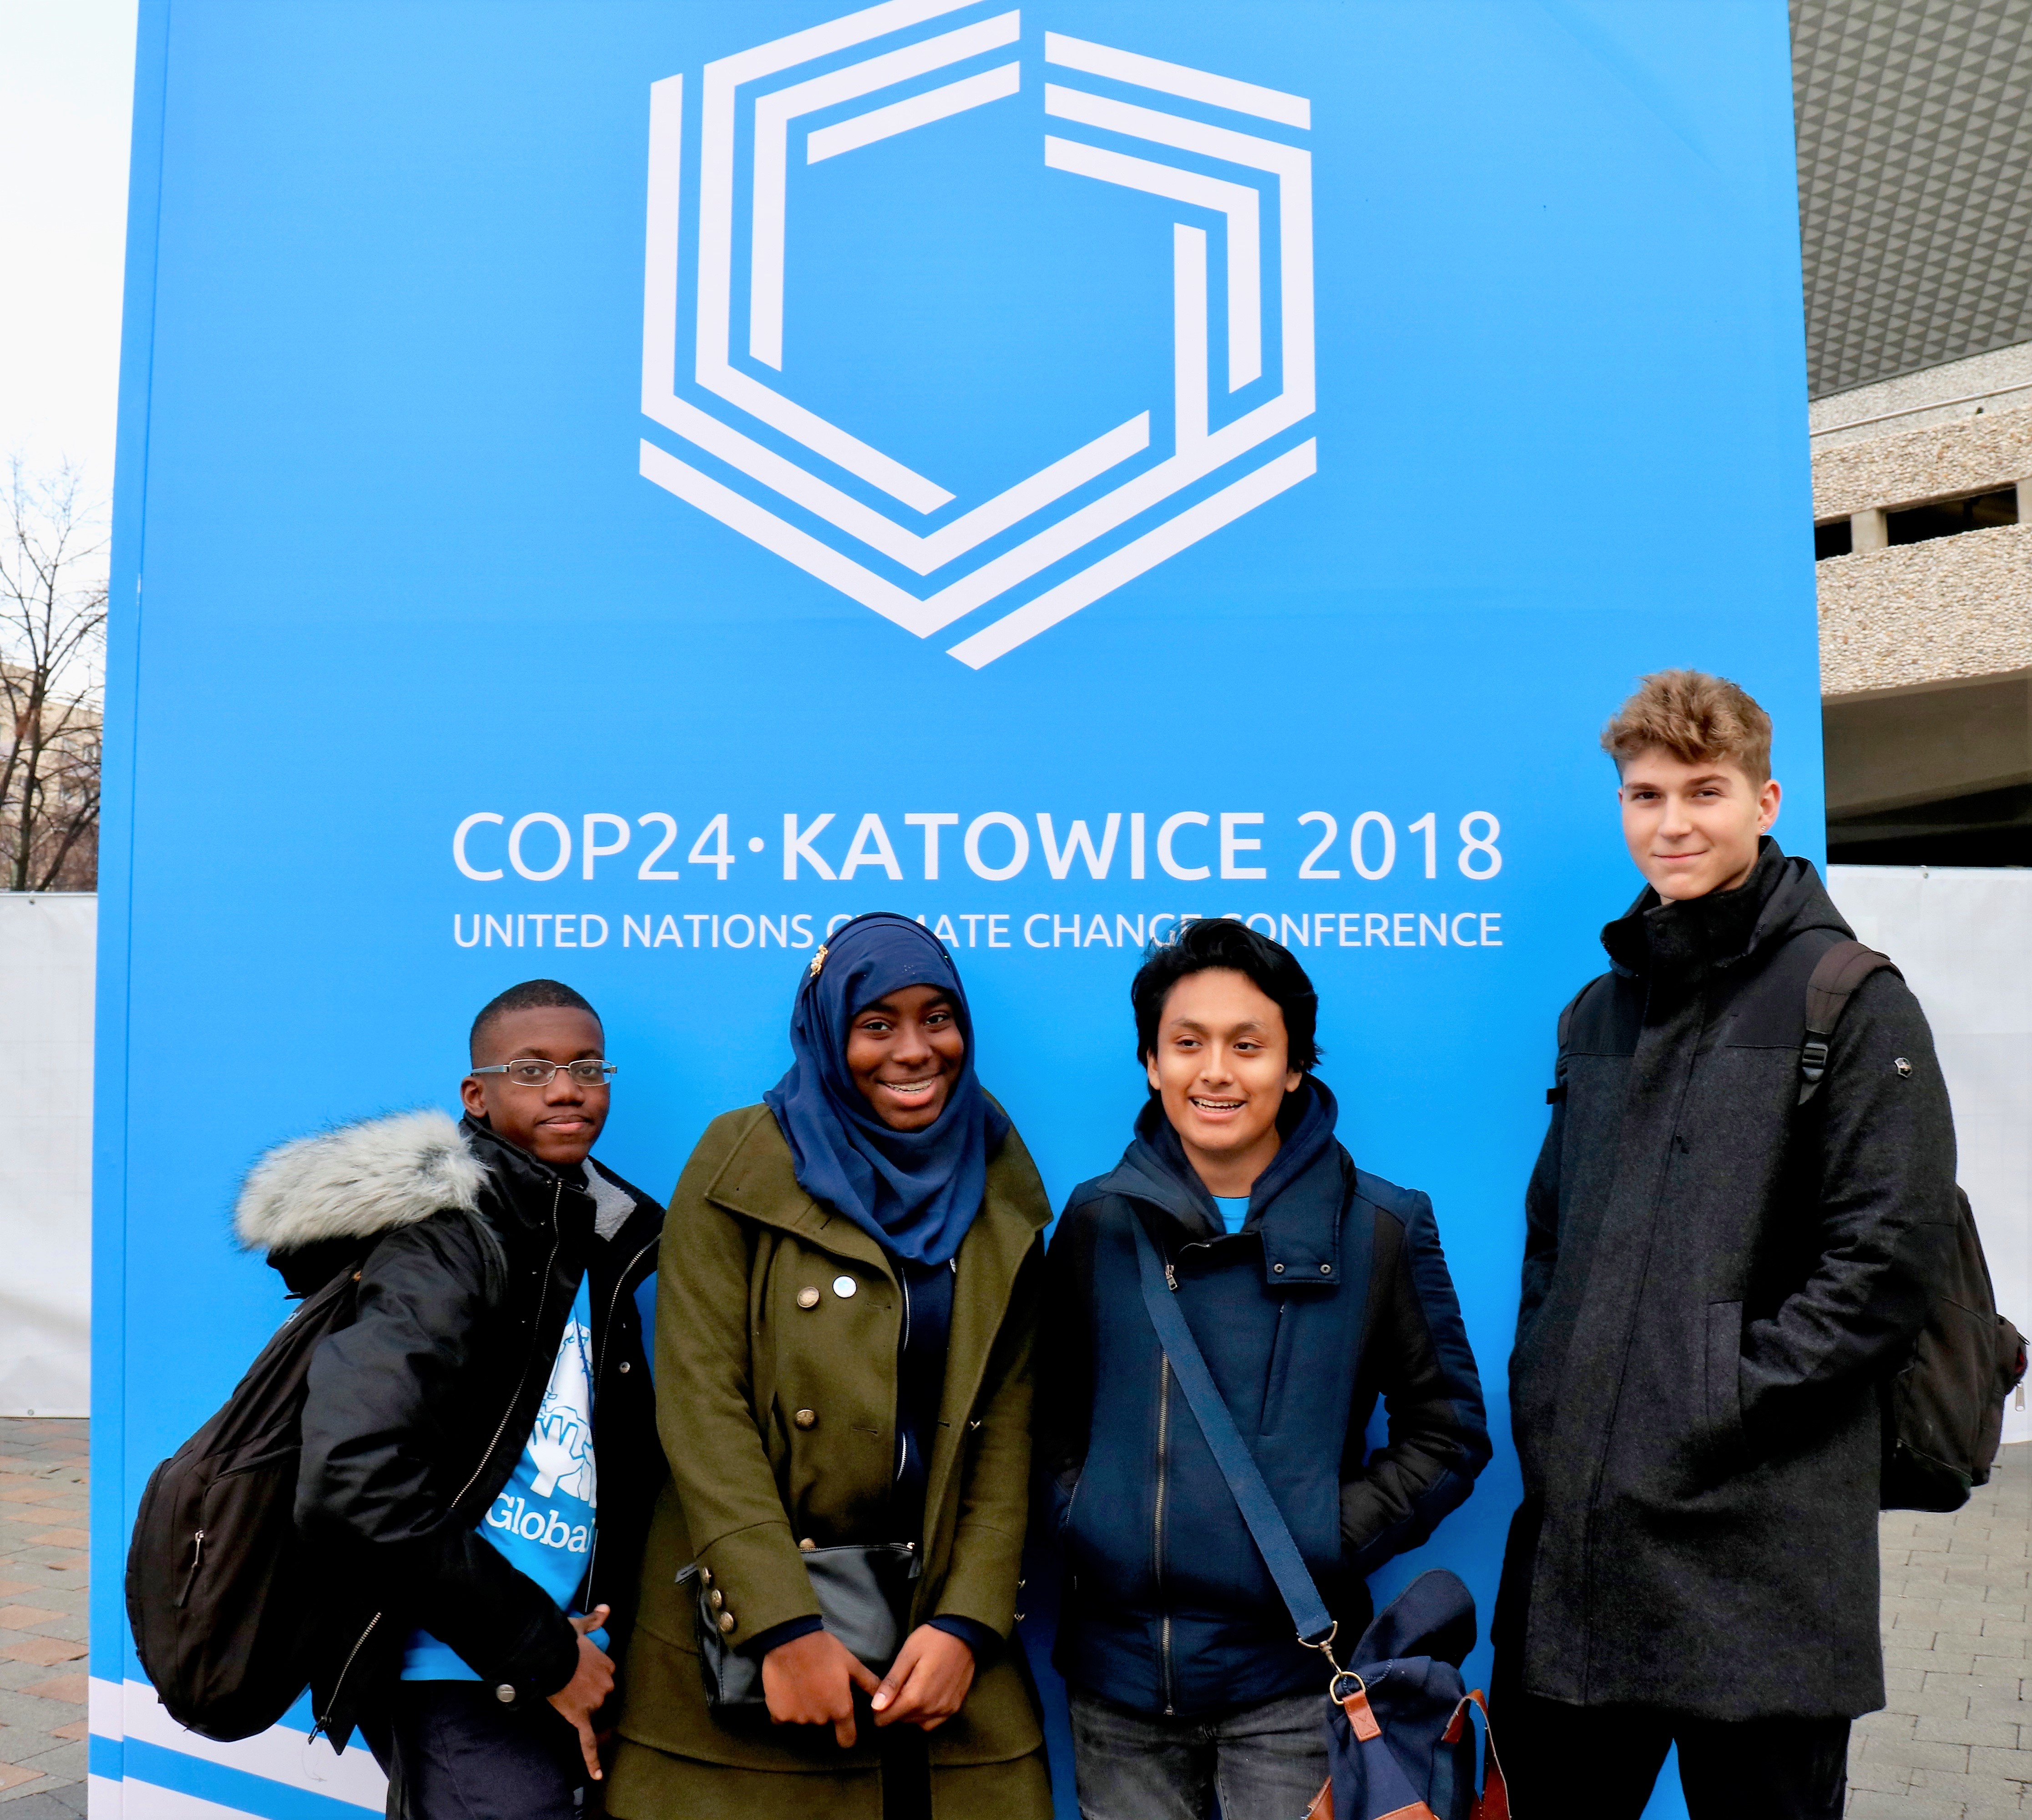 Global Kids - Youth Perspectives of COP24 in Poland